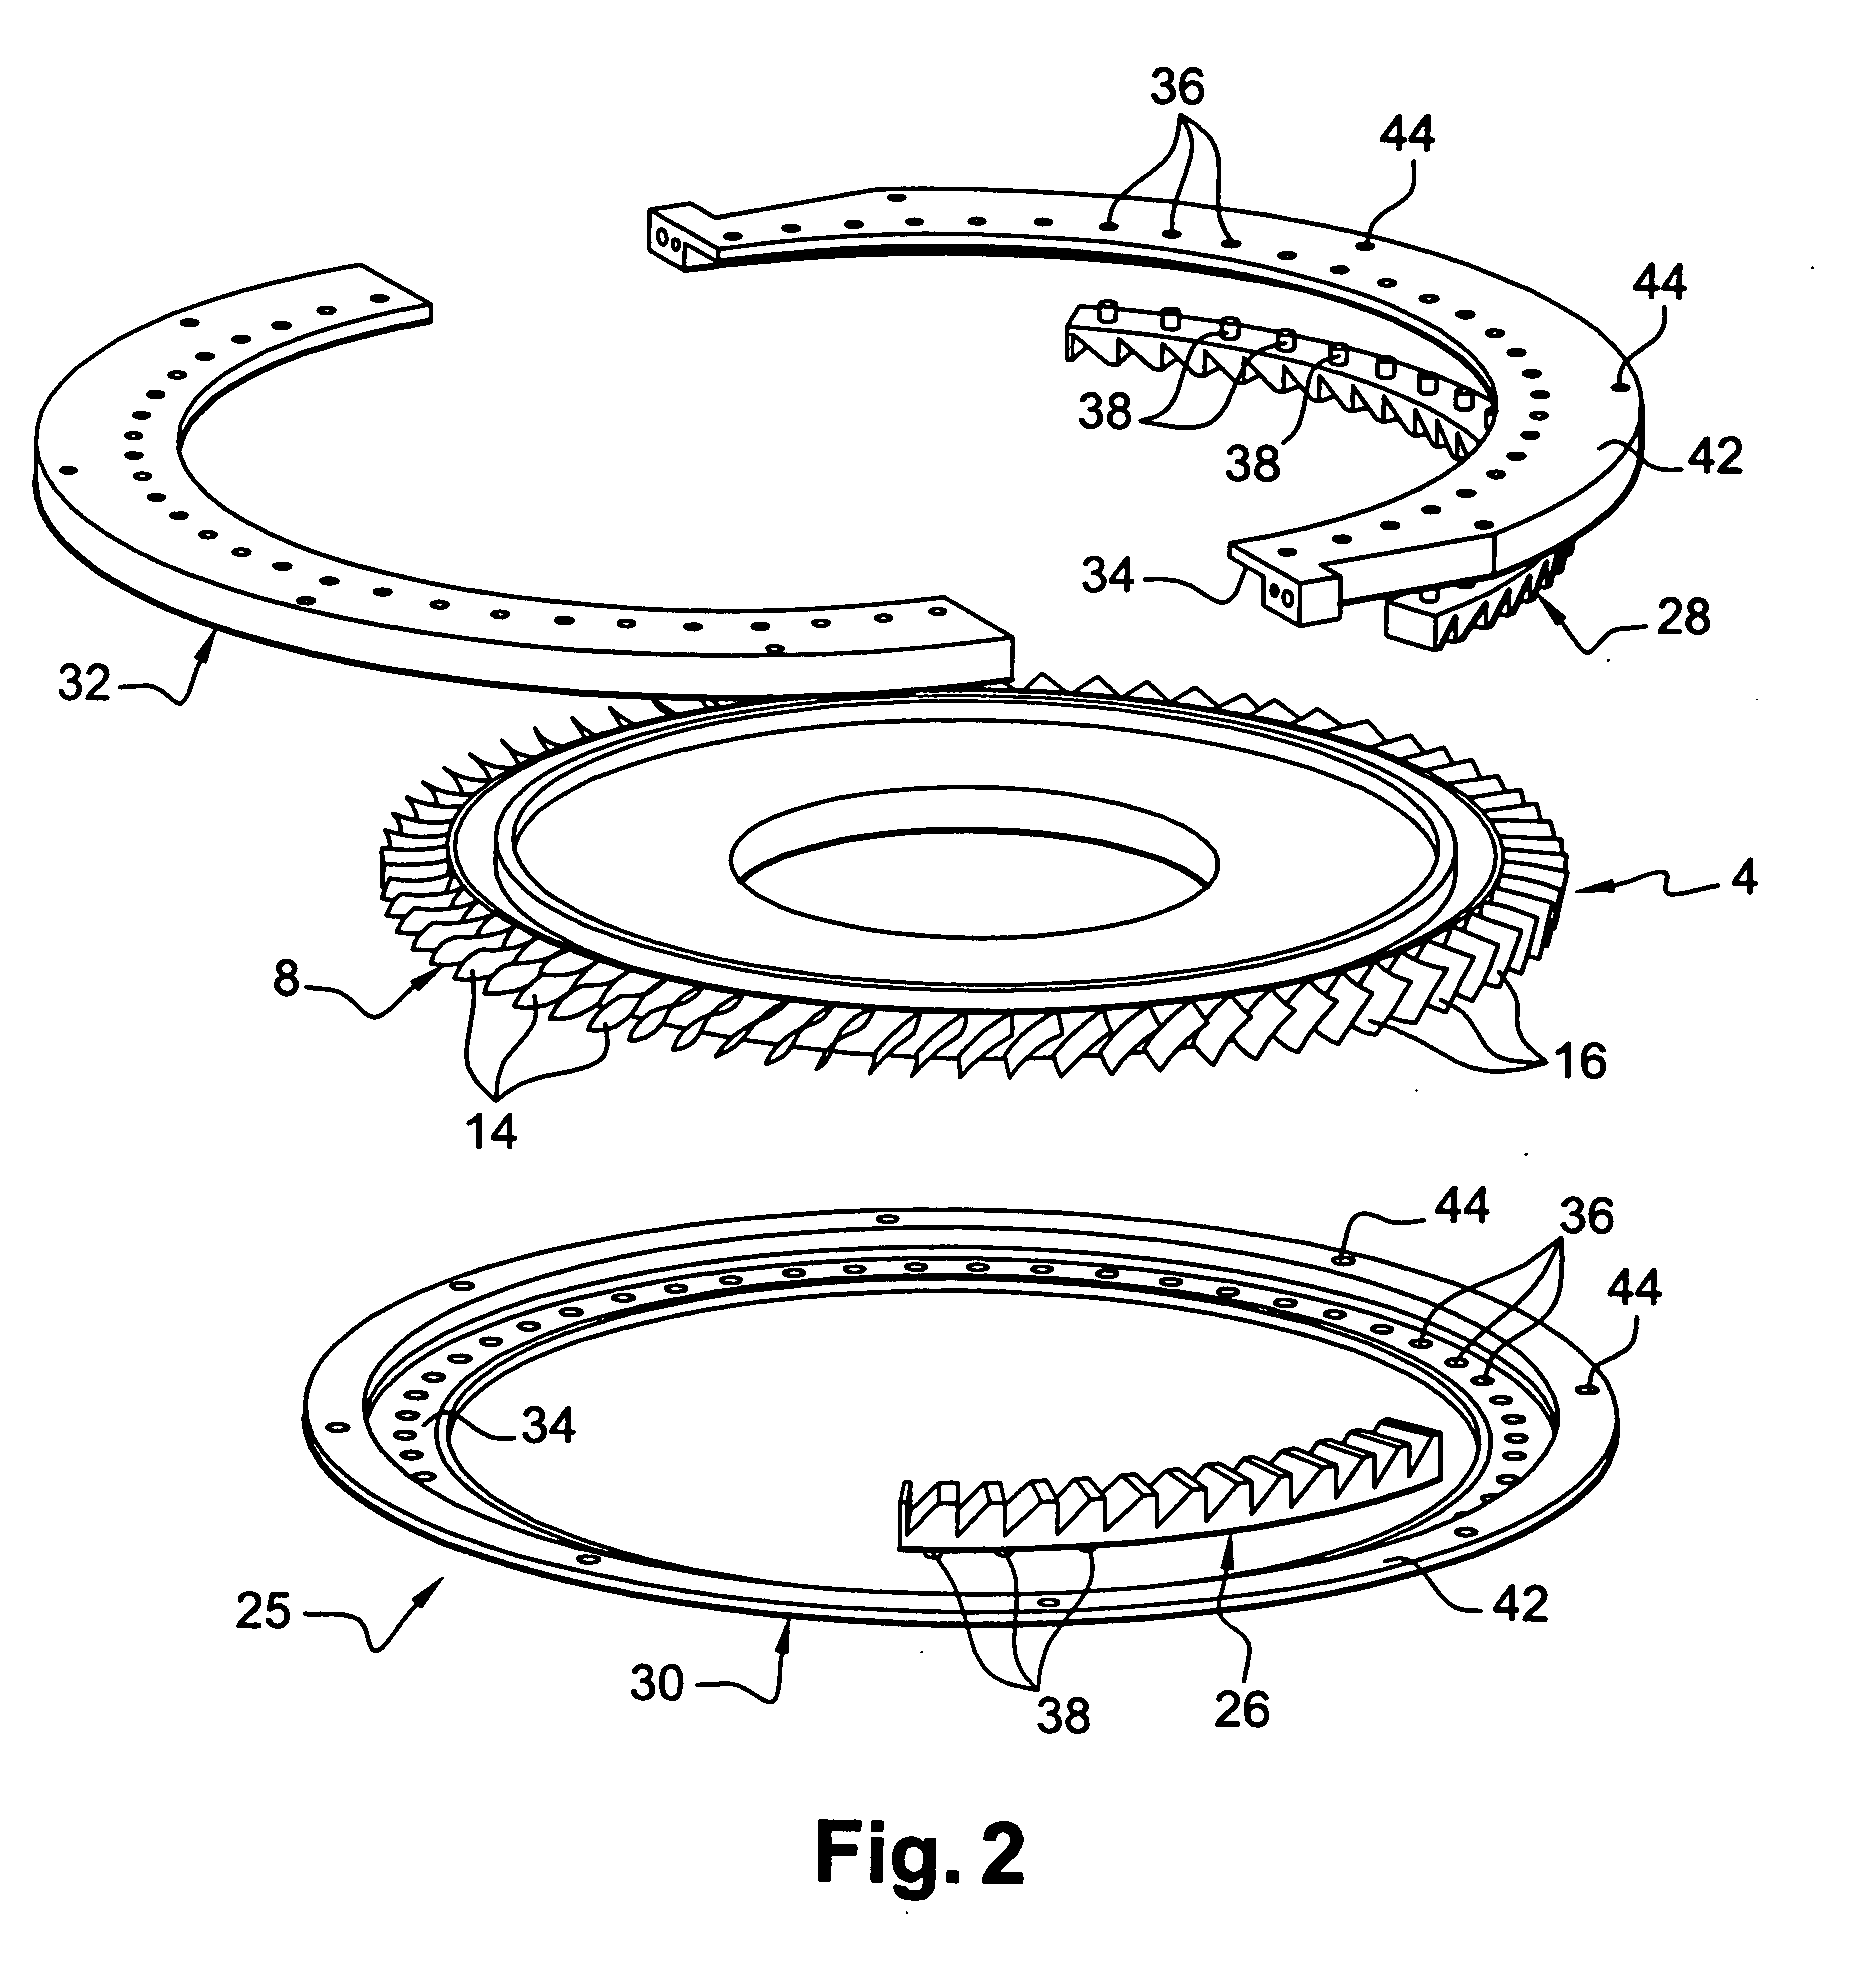 Method of assembling one-piece bladed disks, and a device for damping vibration of the blades of such disks